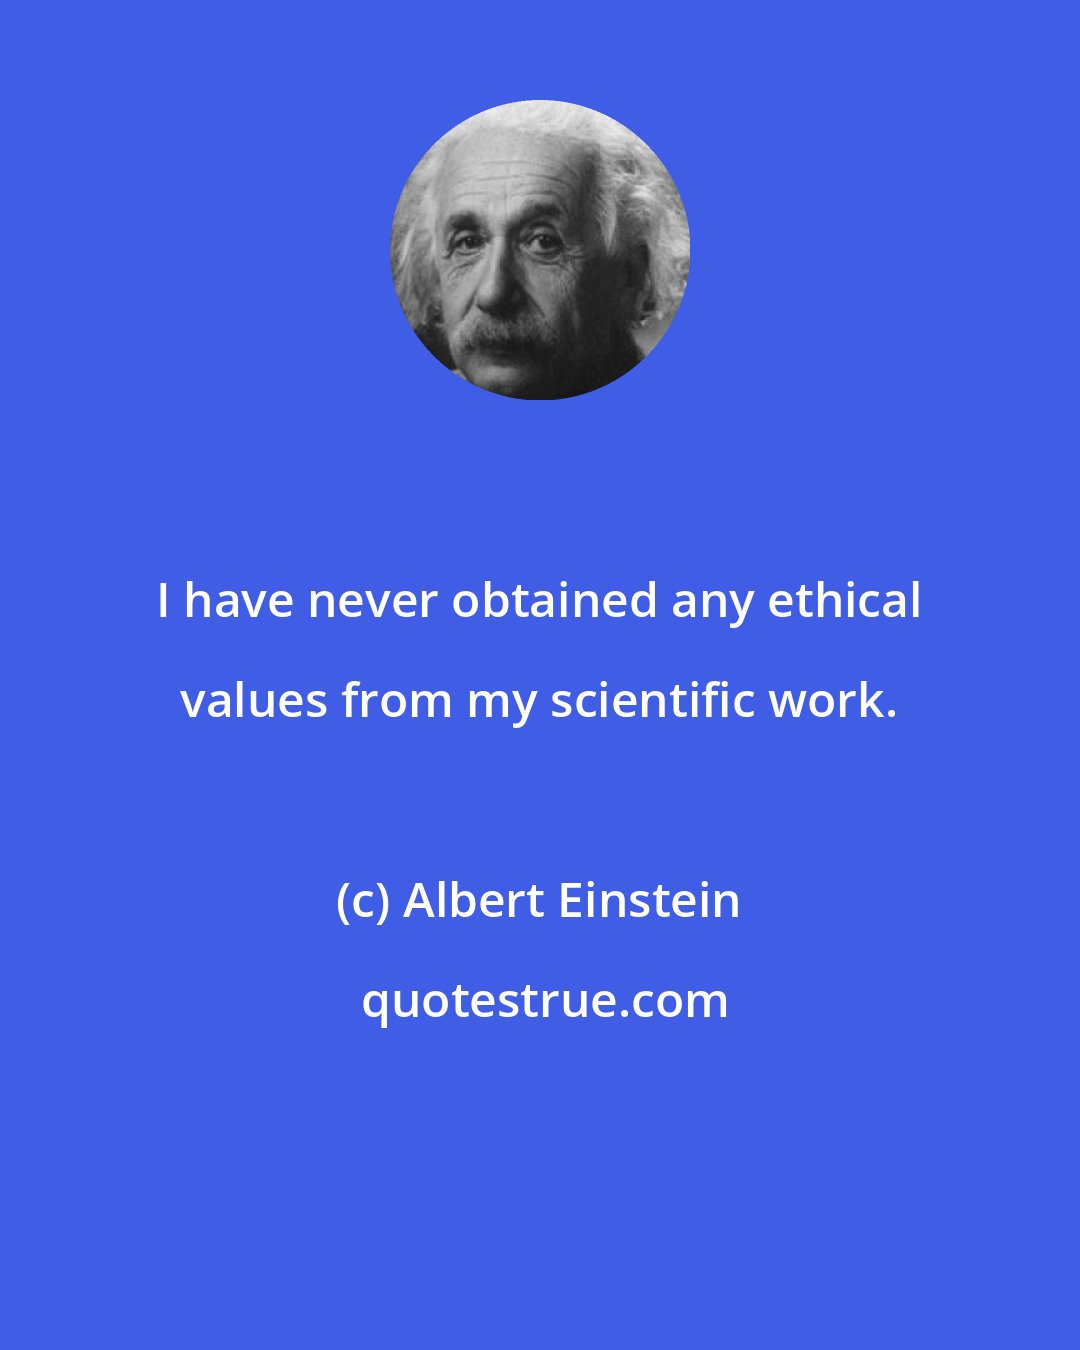 Albert Einstein: I have never obtained any ethical values from my scientific work.